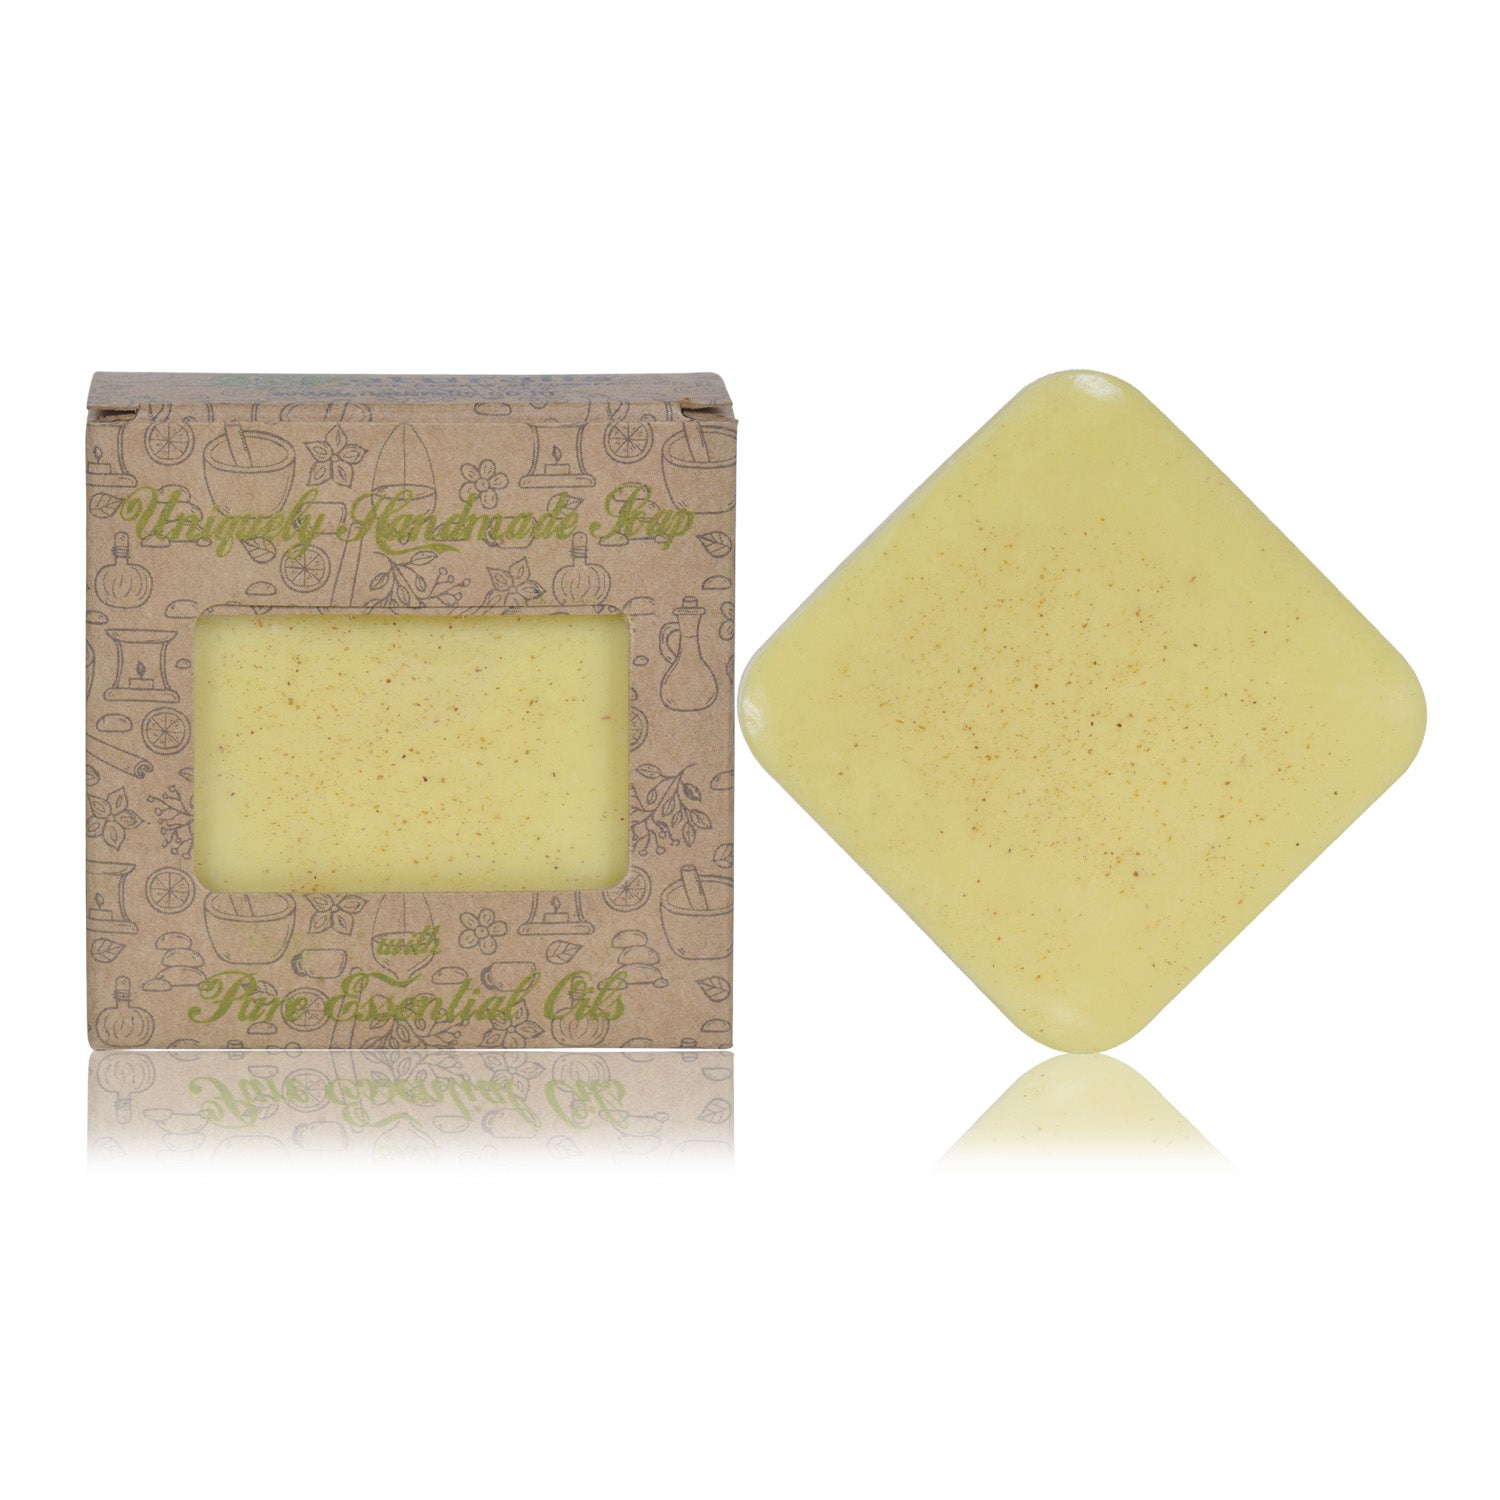 Handmade Soap with Natural Essential Oil Pack of Fifteen - Naturalis